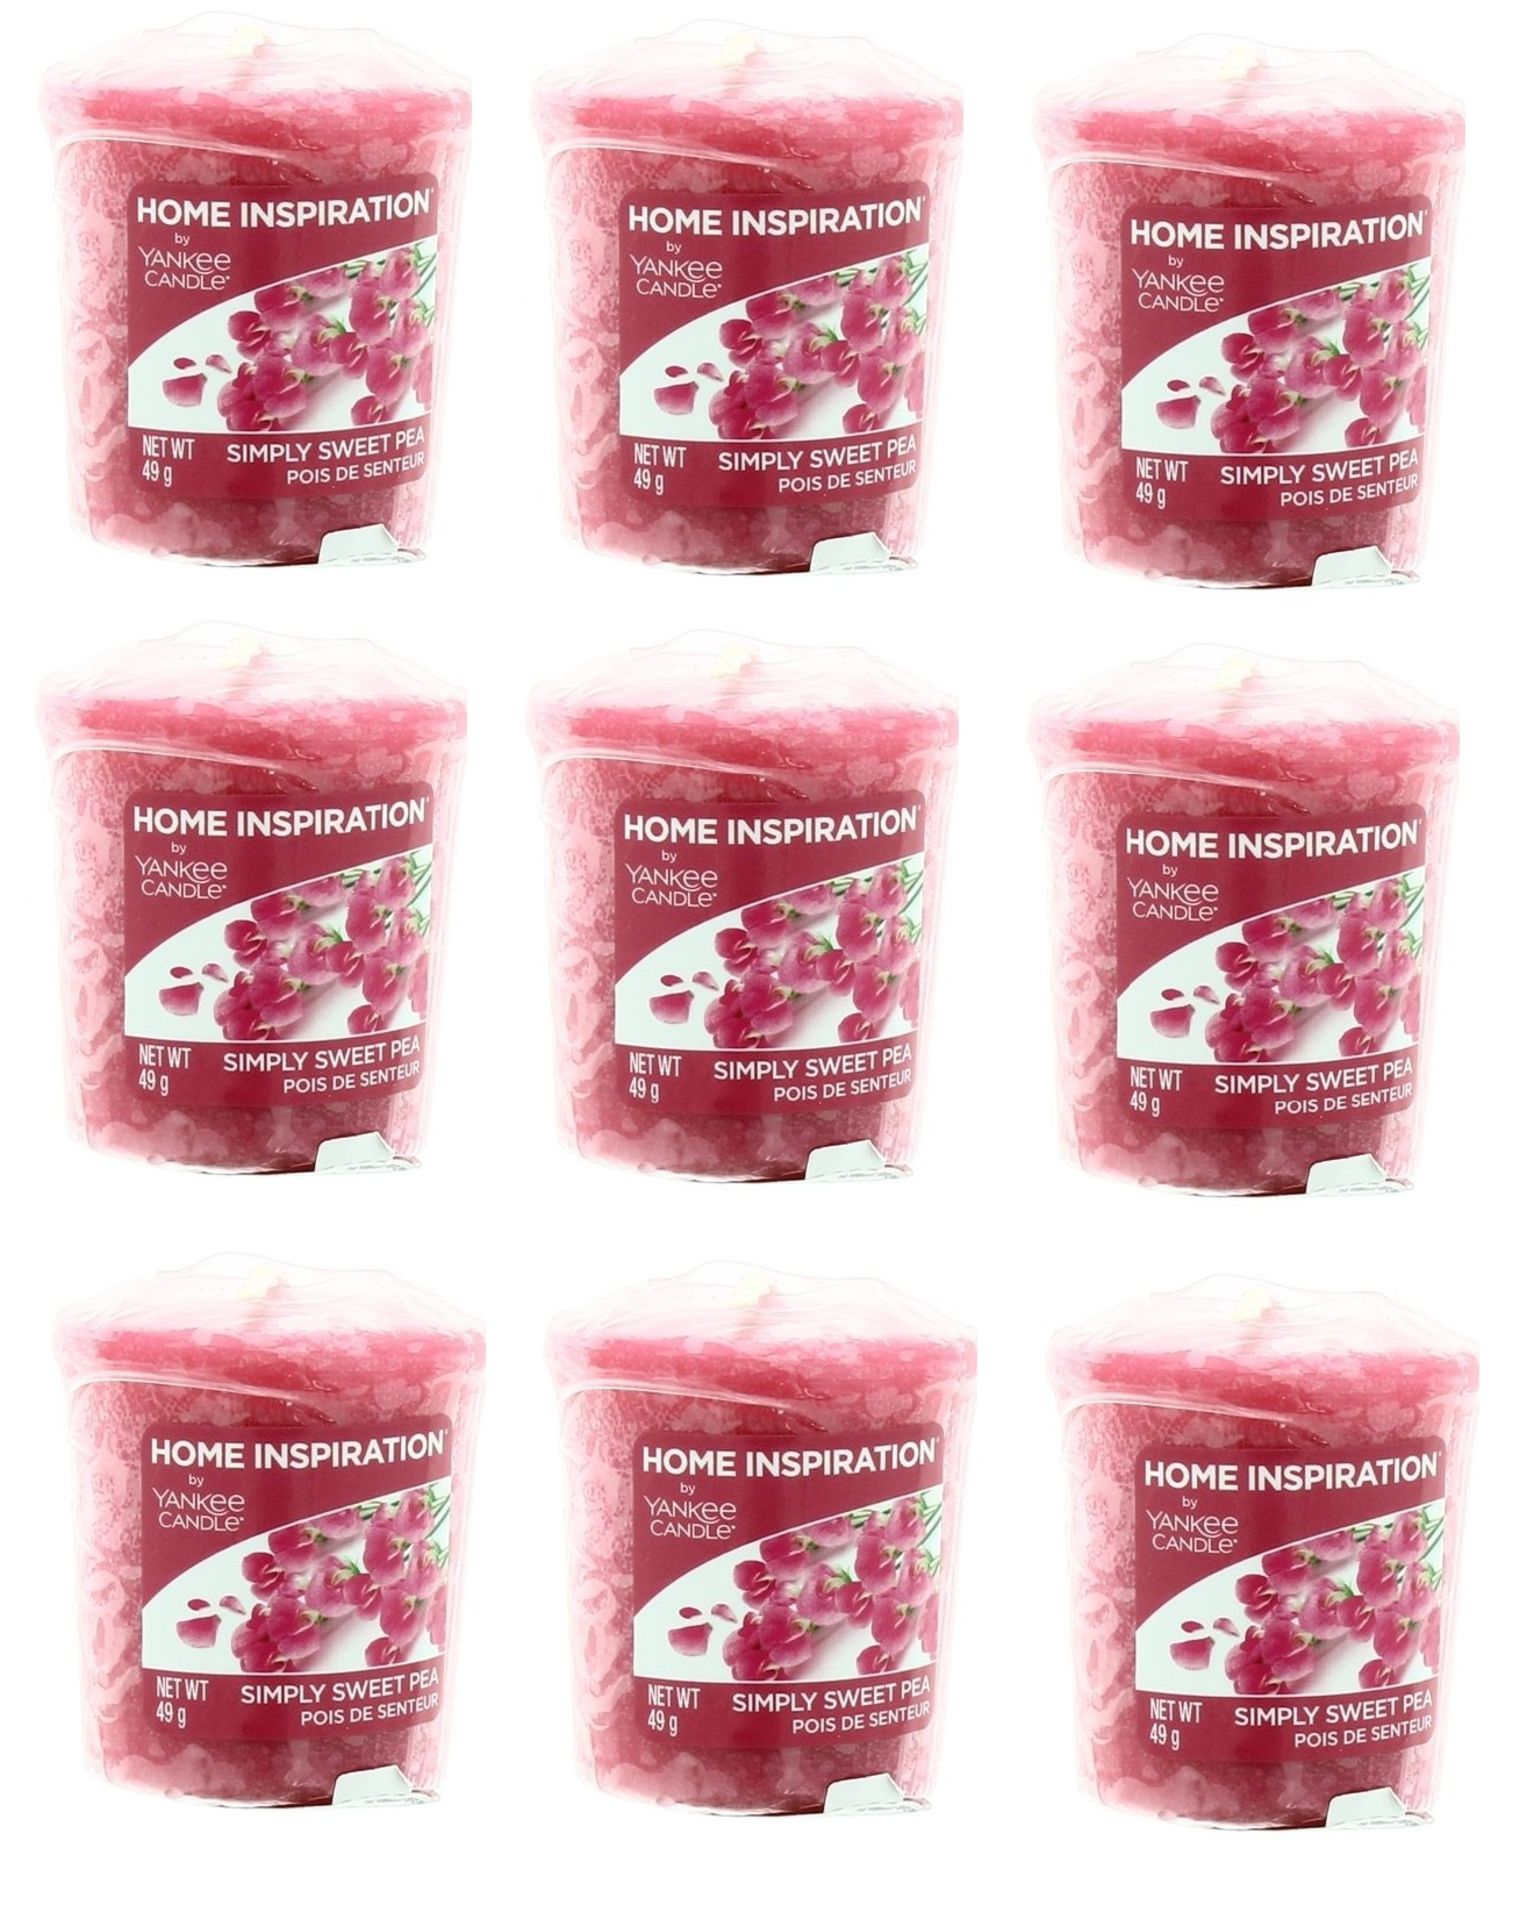 V Brand New 9 x Yankee Candle Votive Simply Sweet Pea Scented Candle - Internet Price £17.91 (